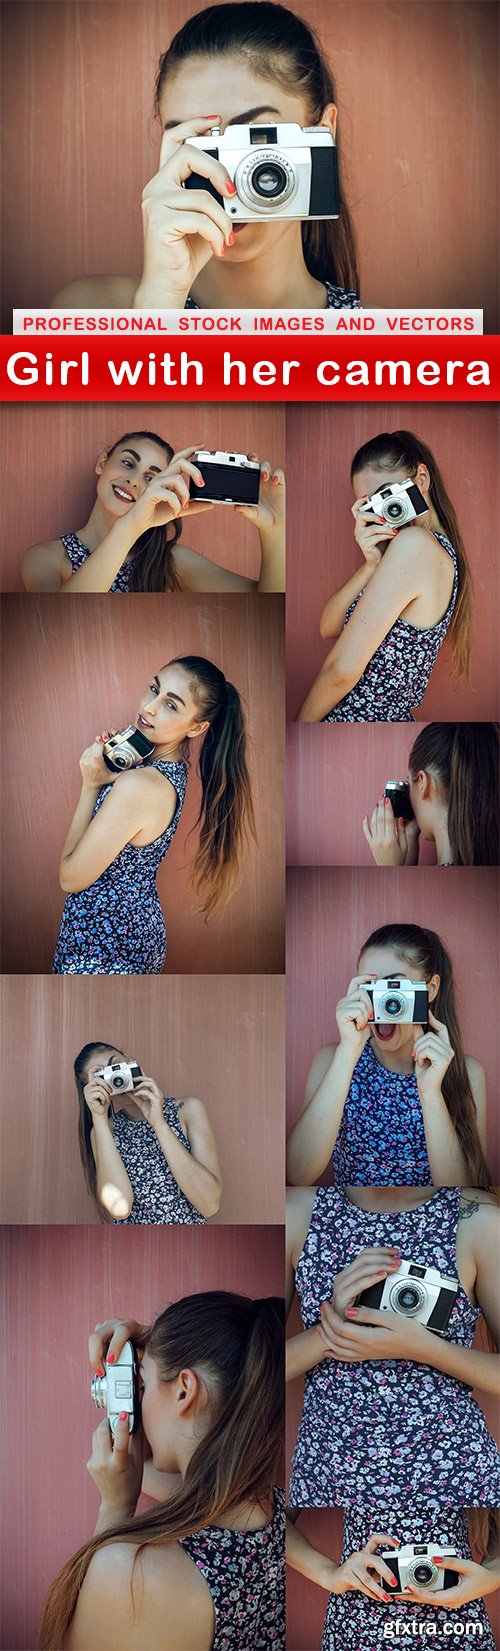 Girl with her camera - 10 UHQ JPEG